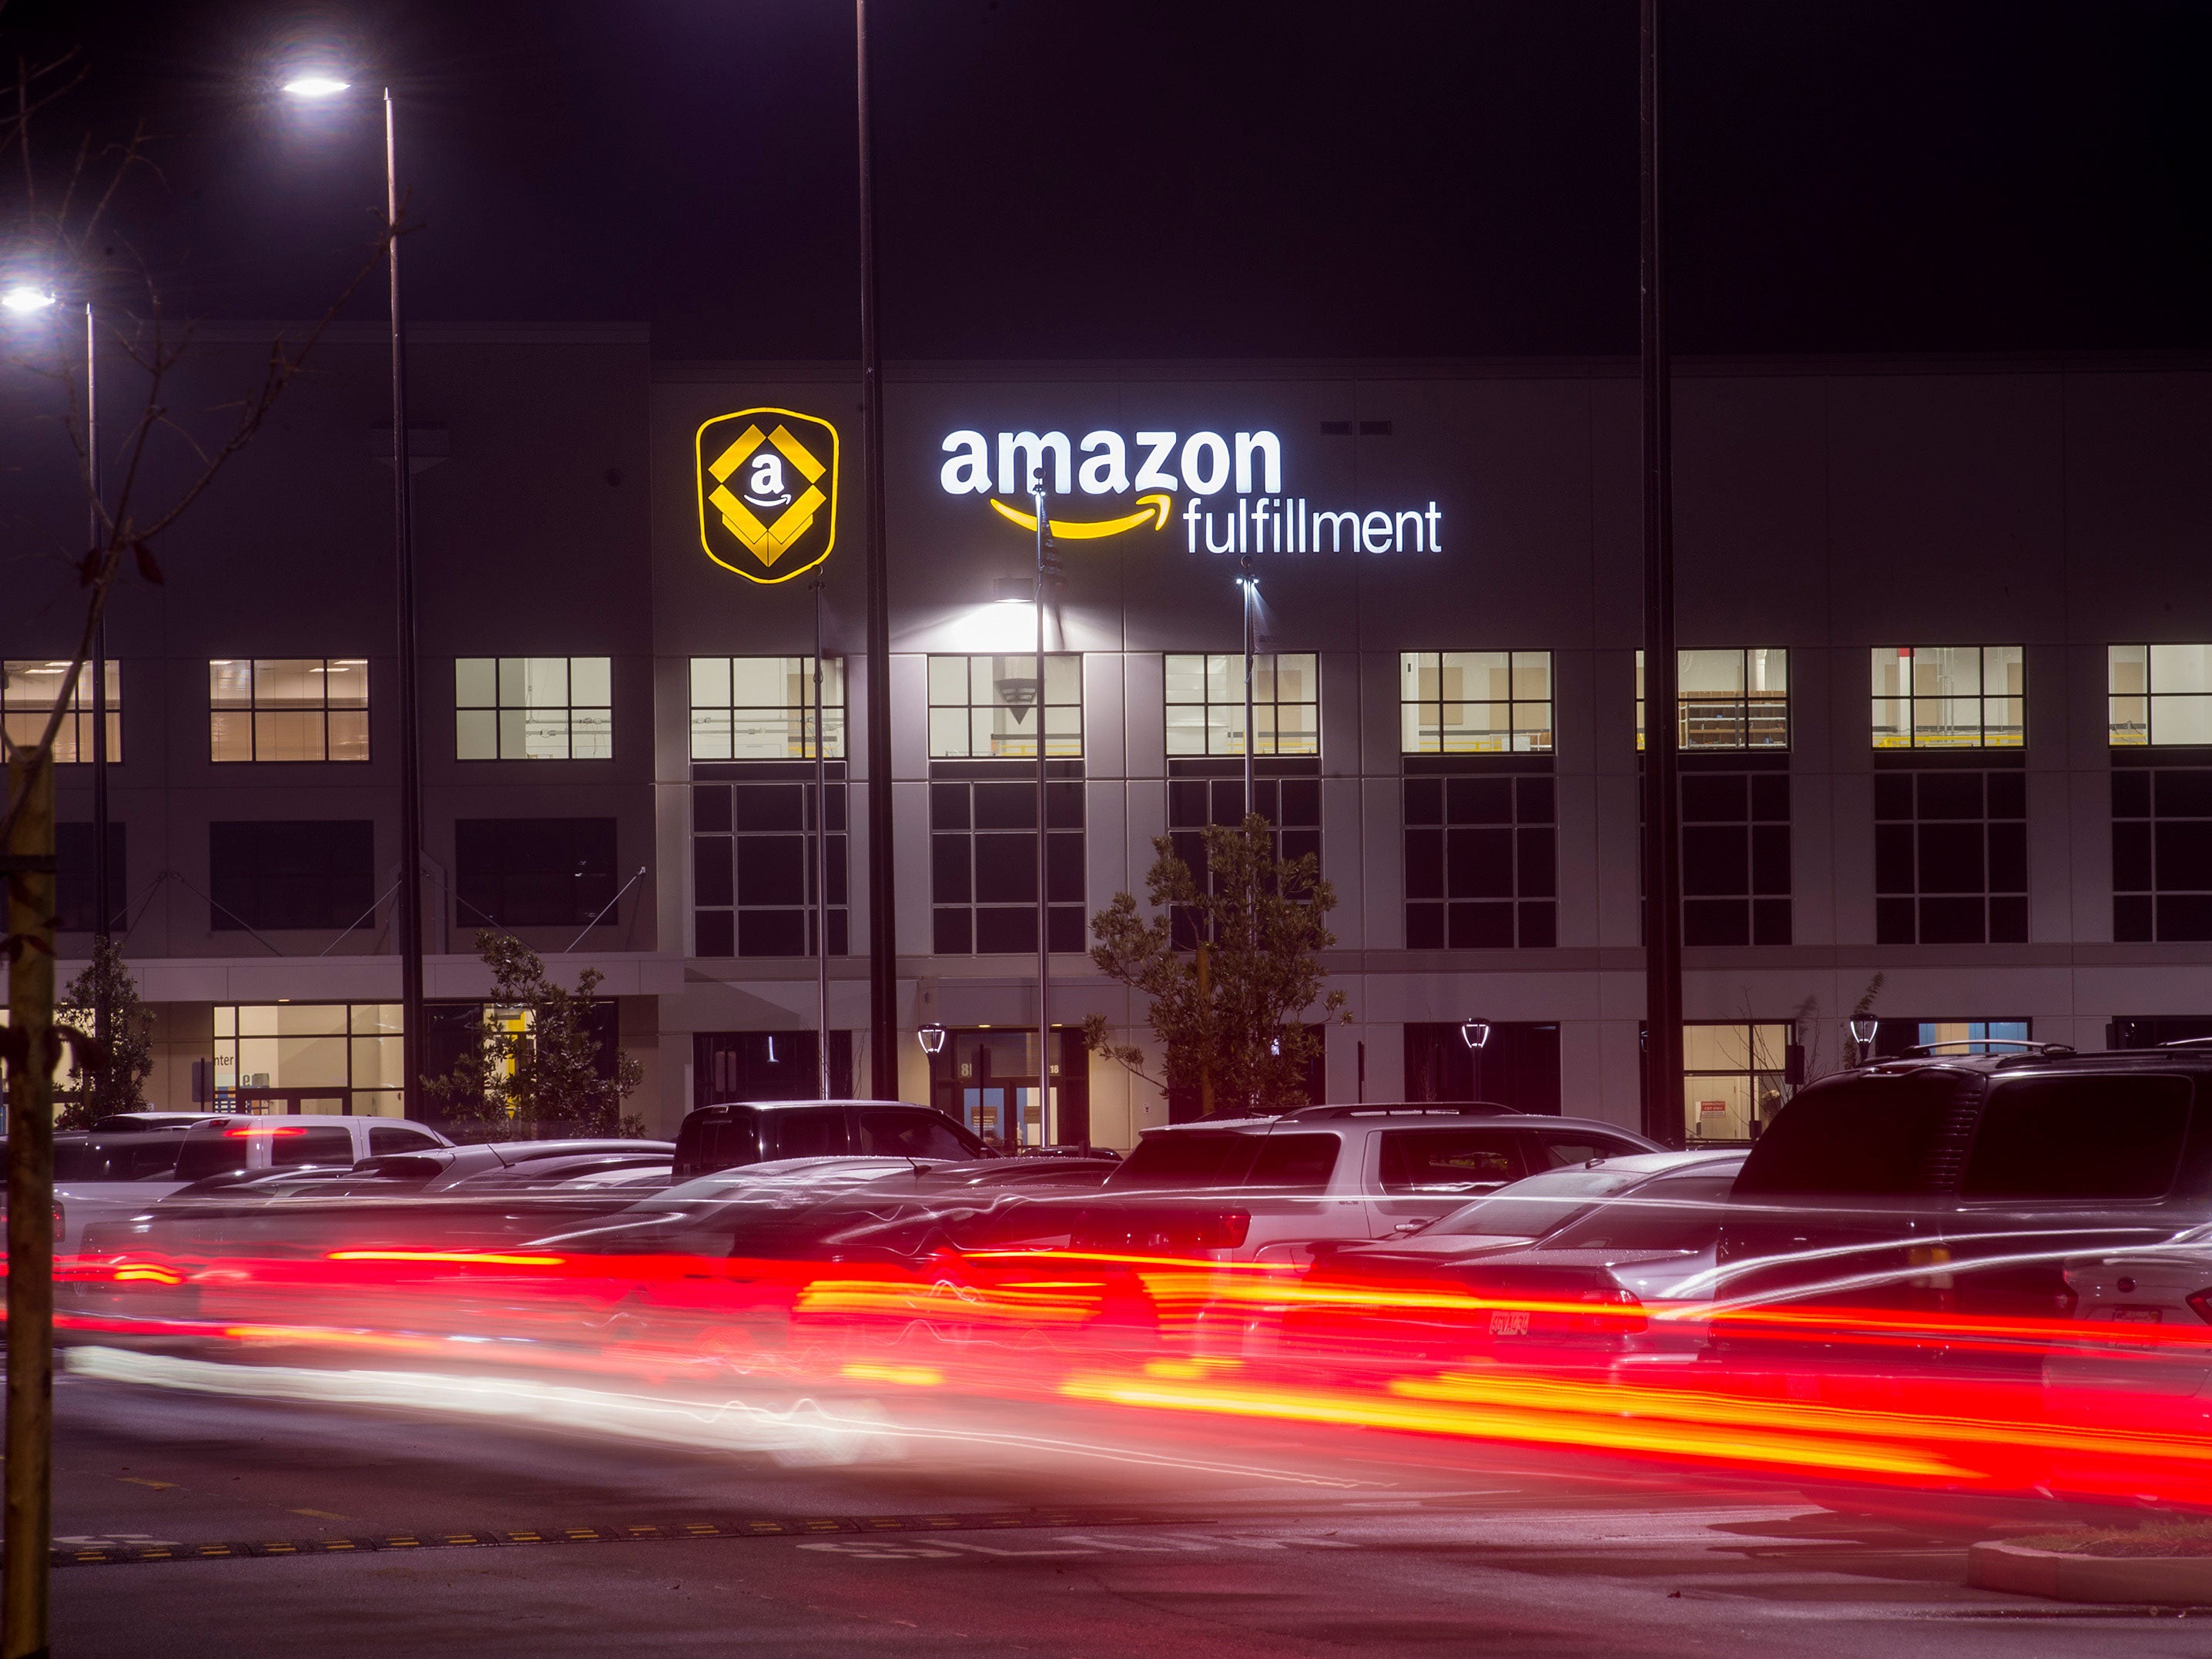 Employees arrive for work at an Amazon Fulfillment Center, ahead of the Christmas rush, in Tracy, California, November 30, 2014